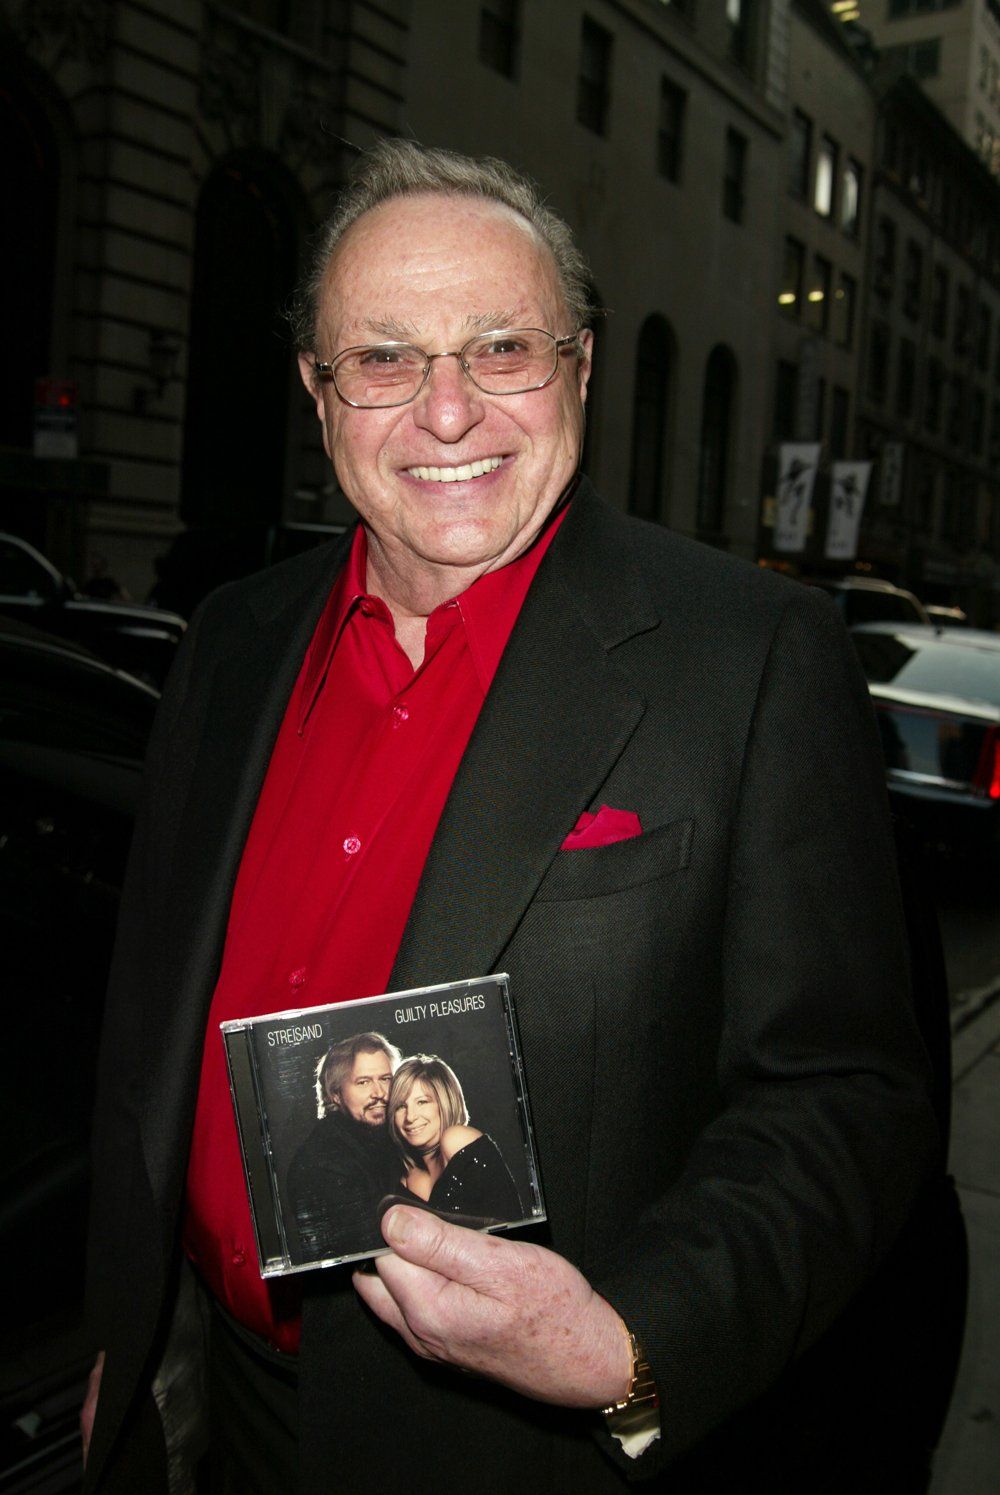 Marty Erlichman holds the Guilty Pleasures CD.